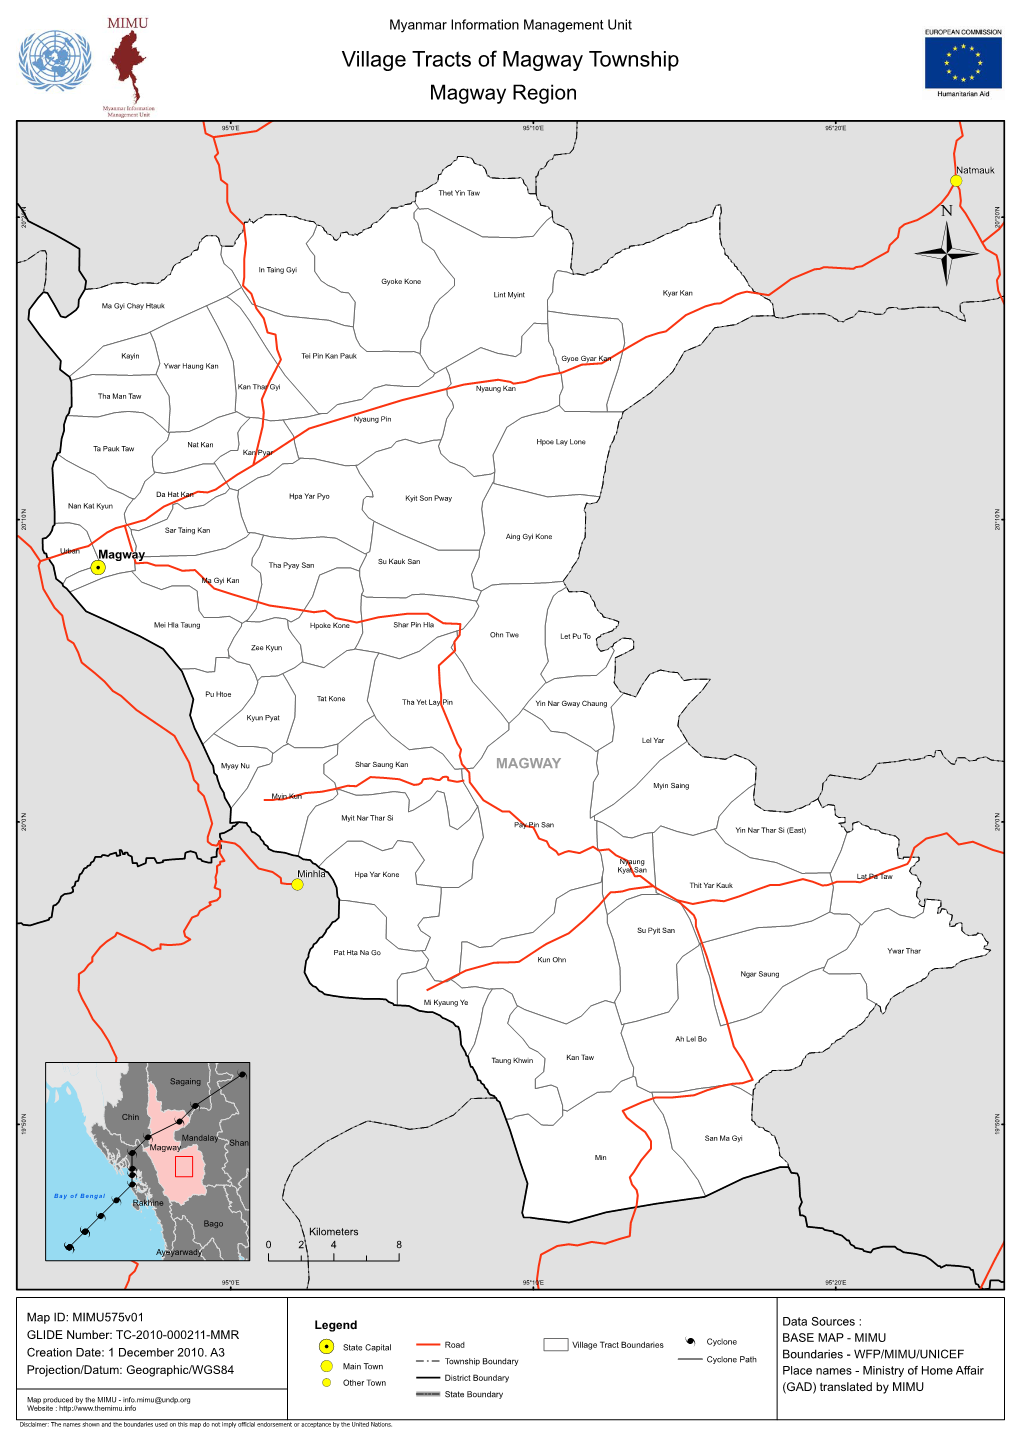 Village Tracts of Magway Township Magway Region